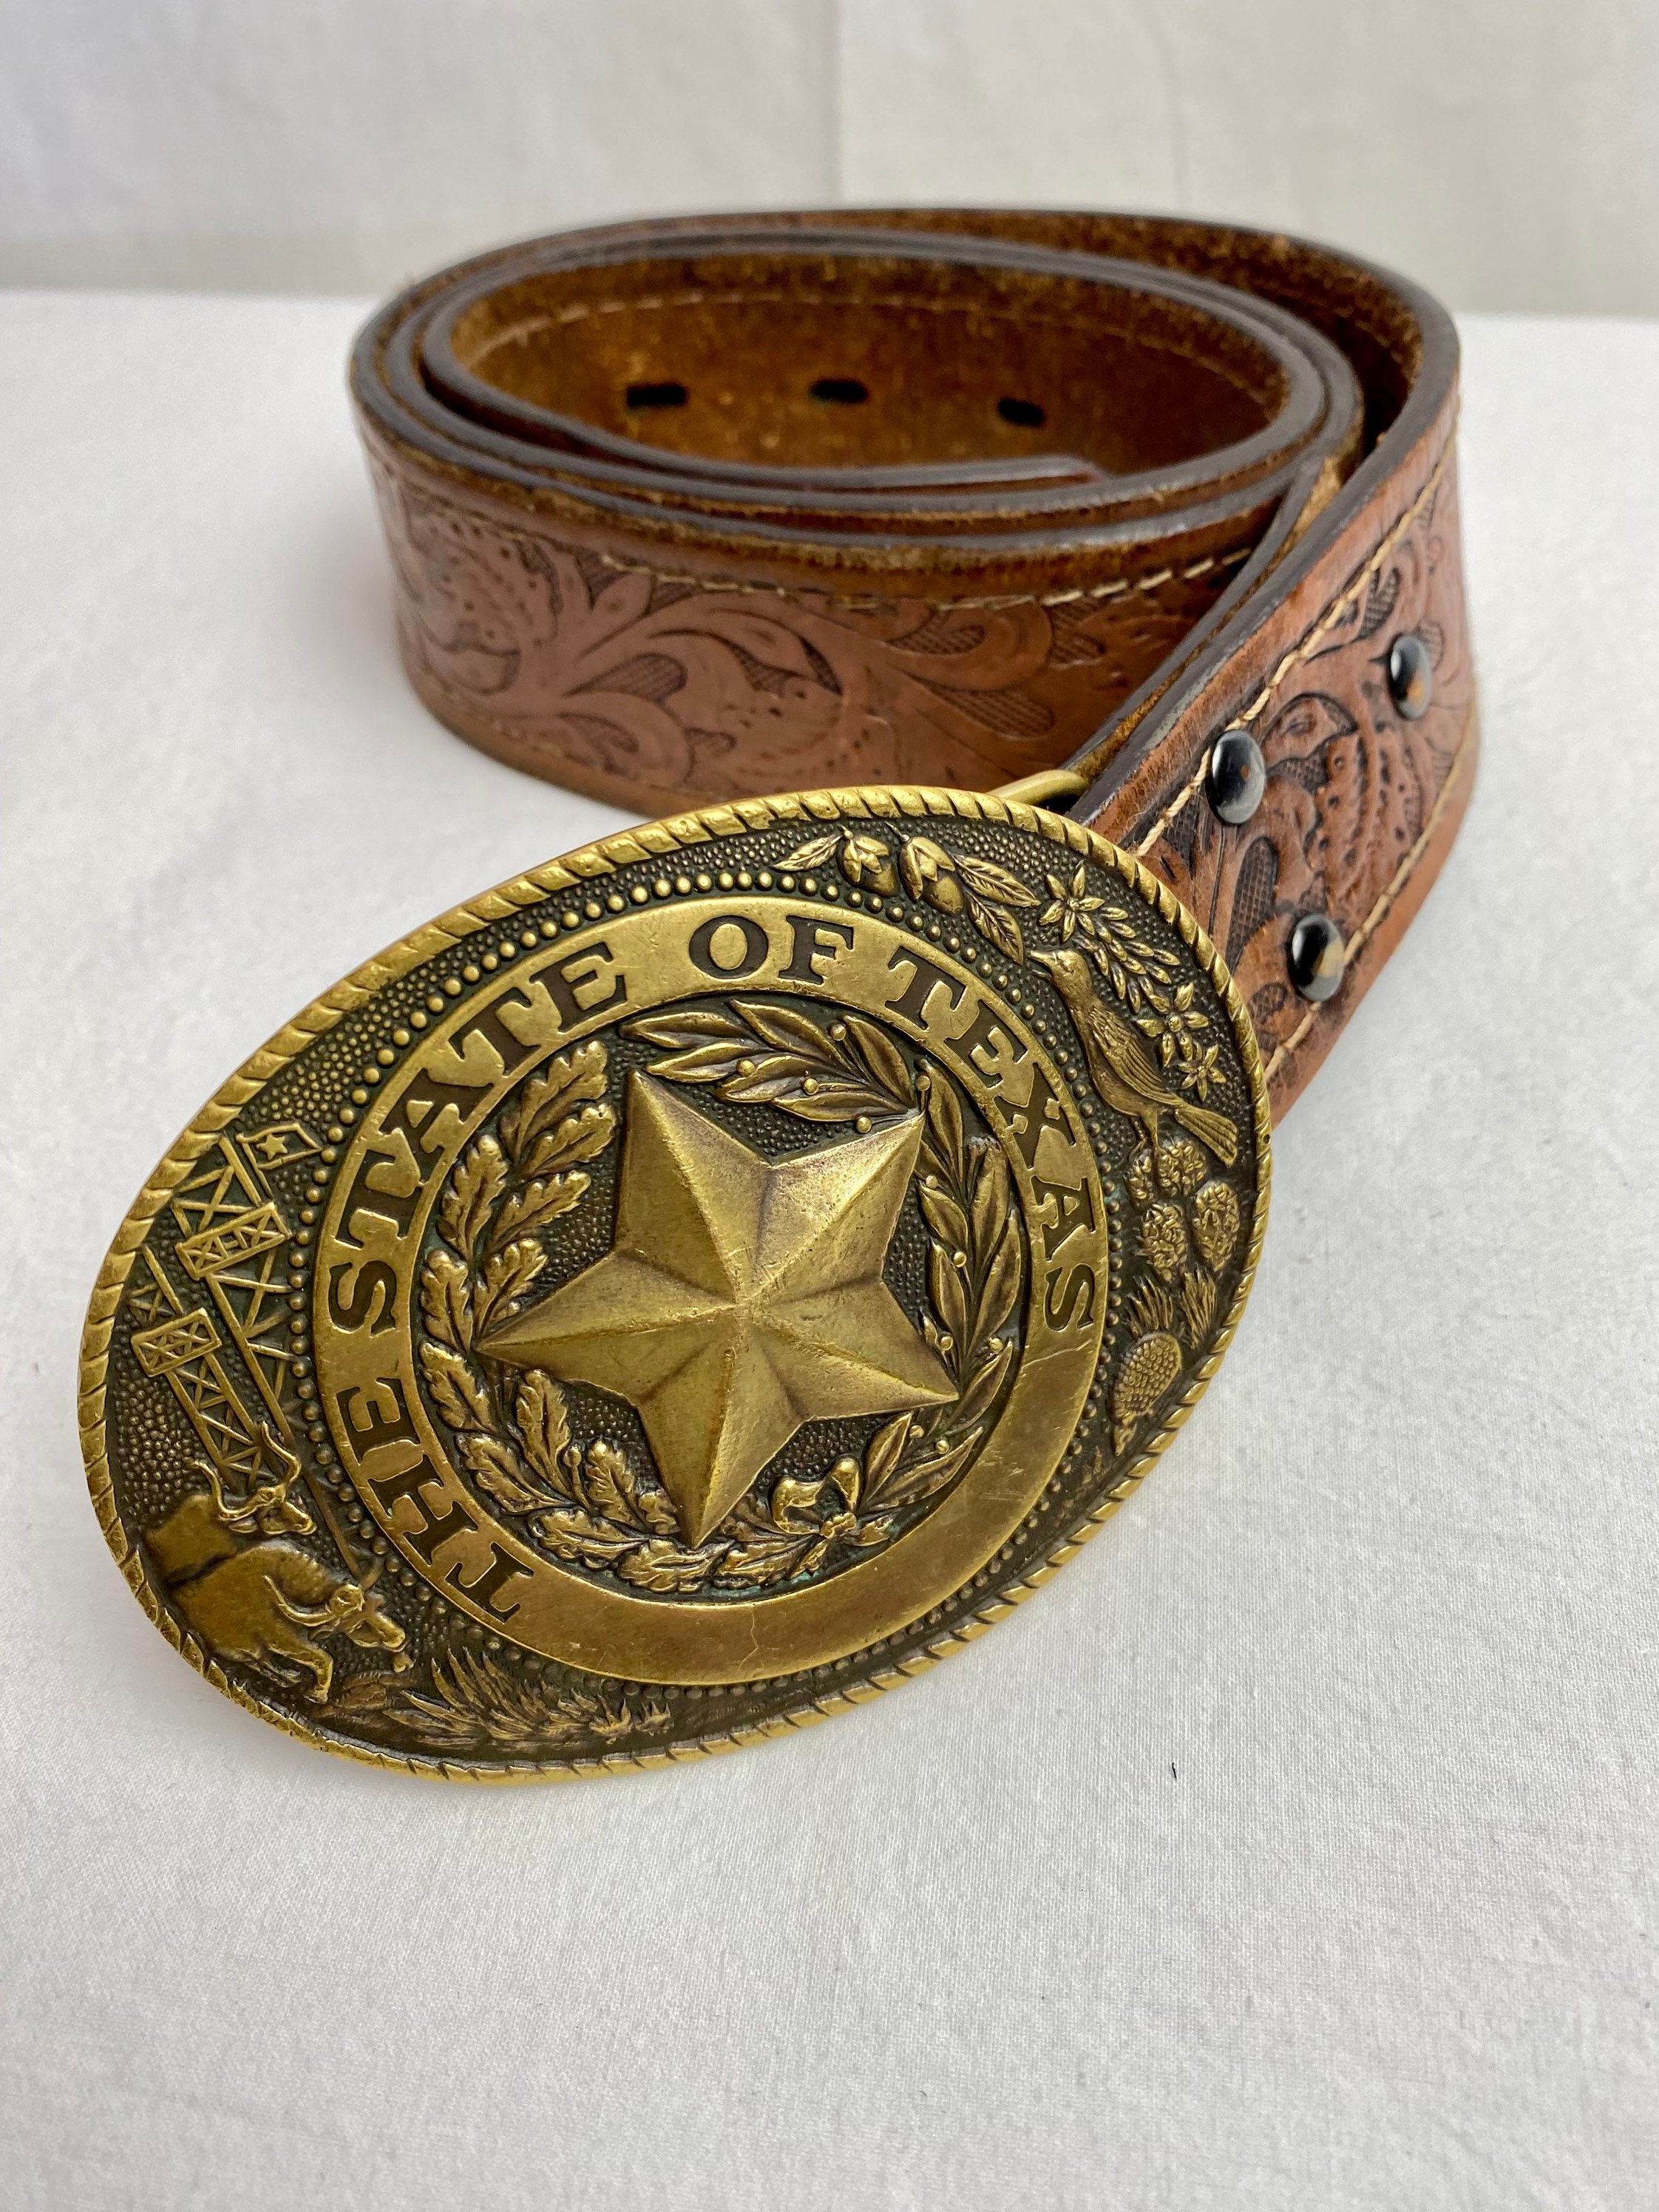 Western Style Star Trophy Belt Buckle with Antique Nickel Texas Sheriff  Concho - Texas Uniques Store